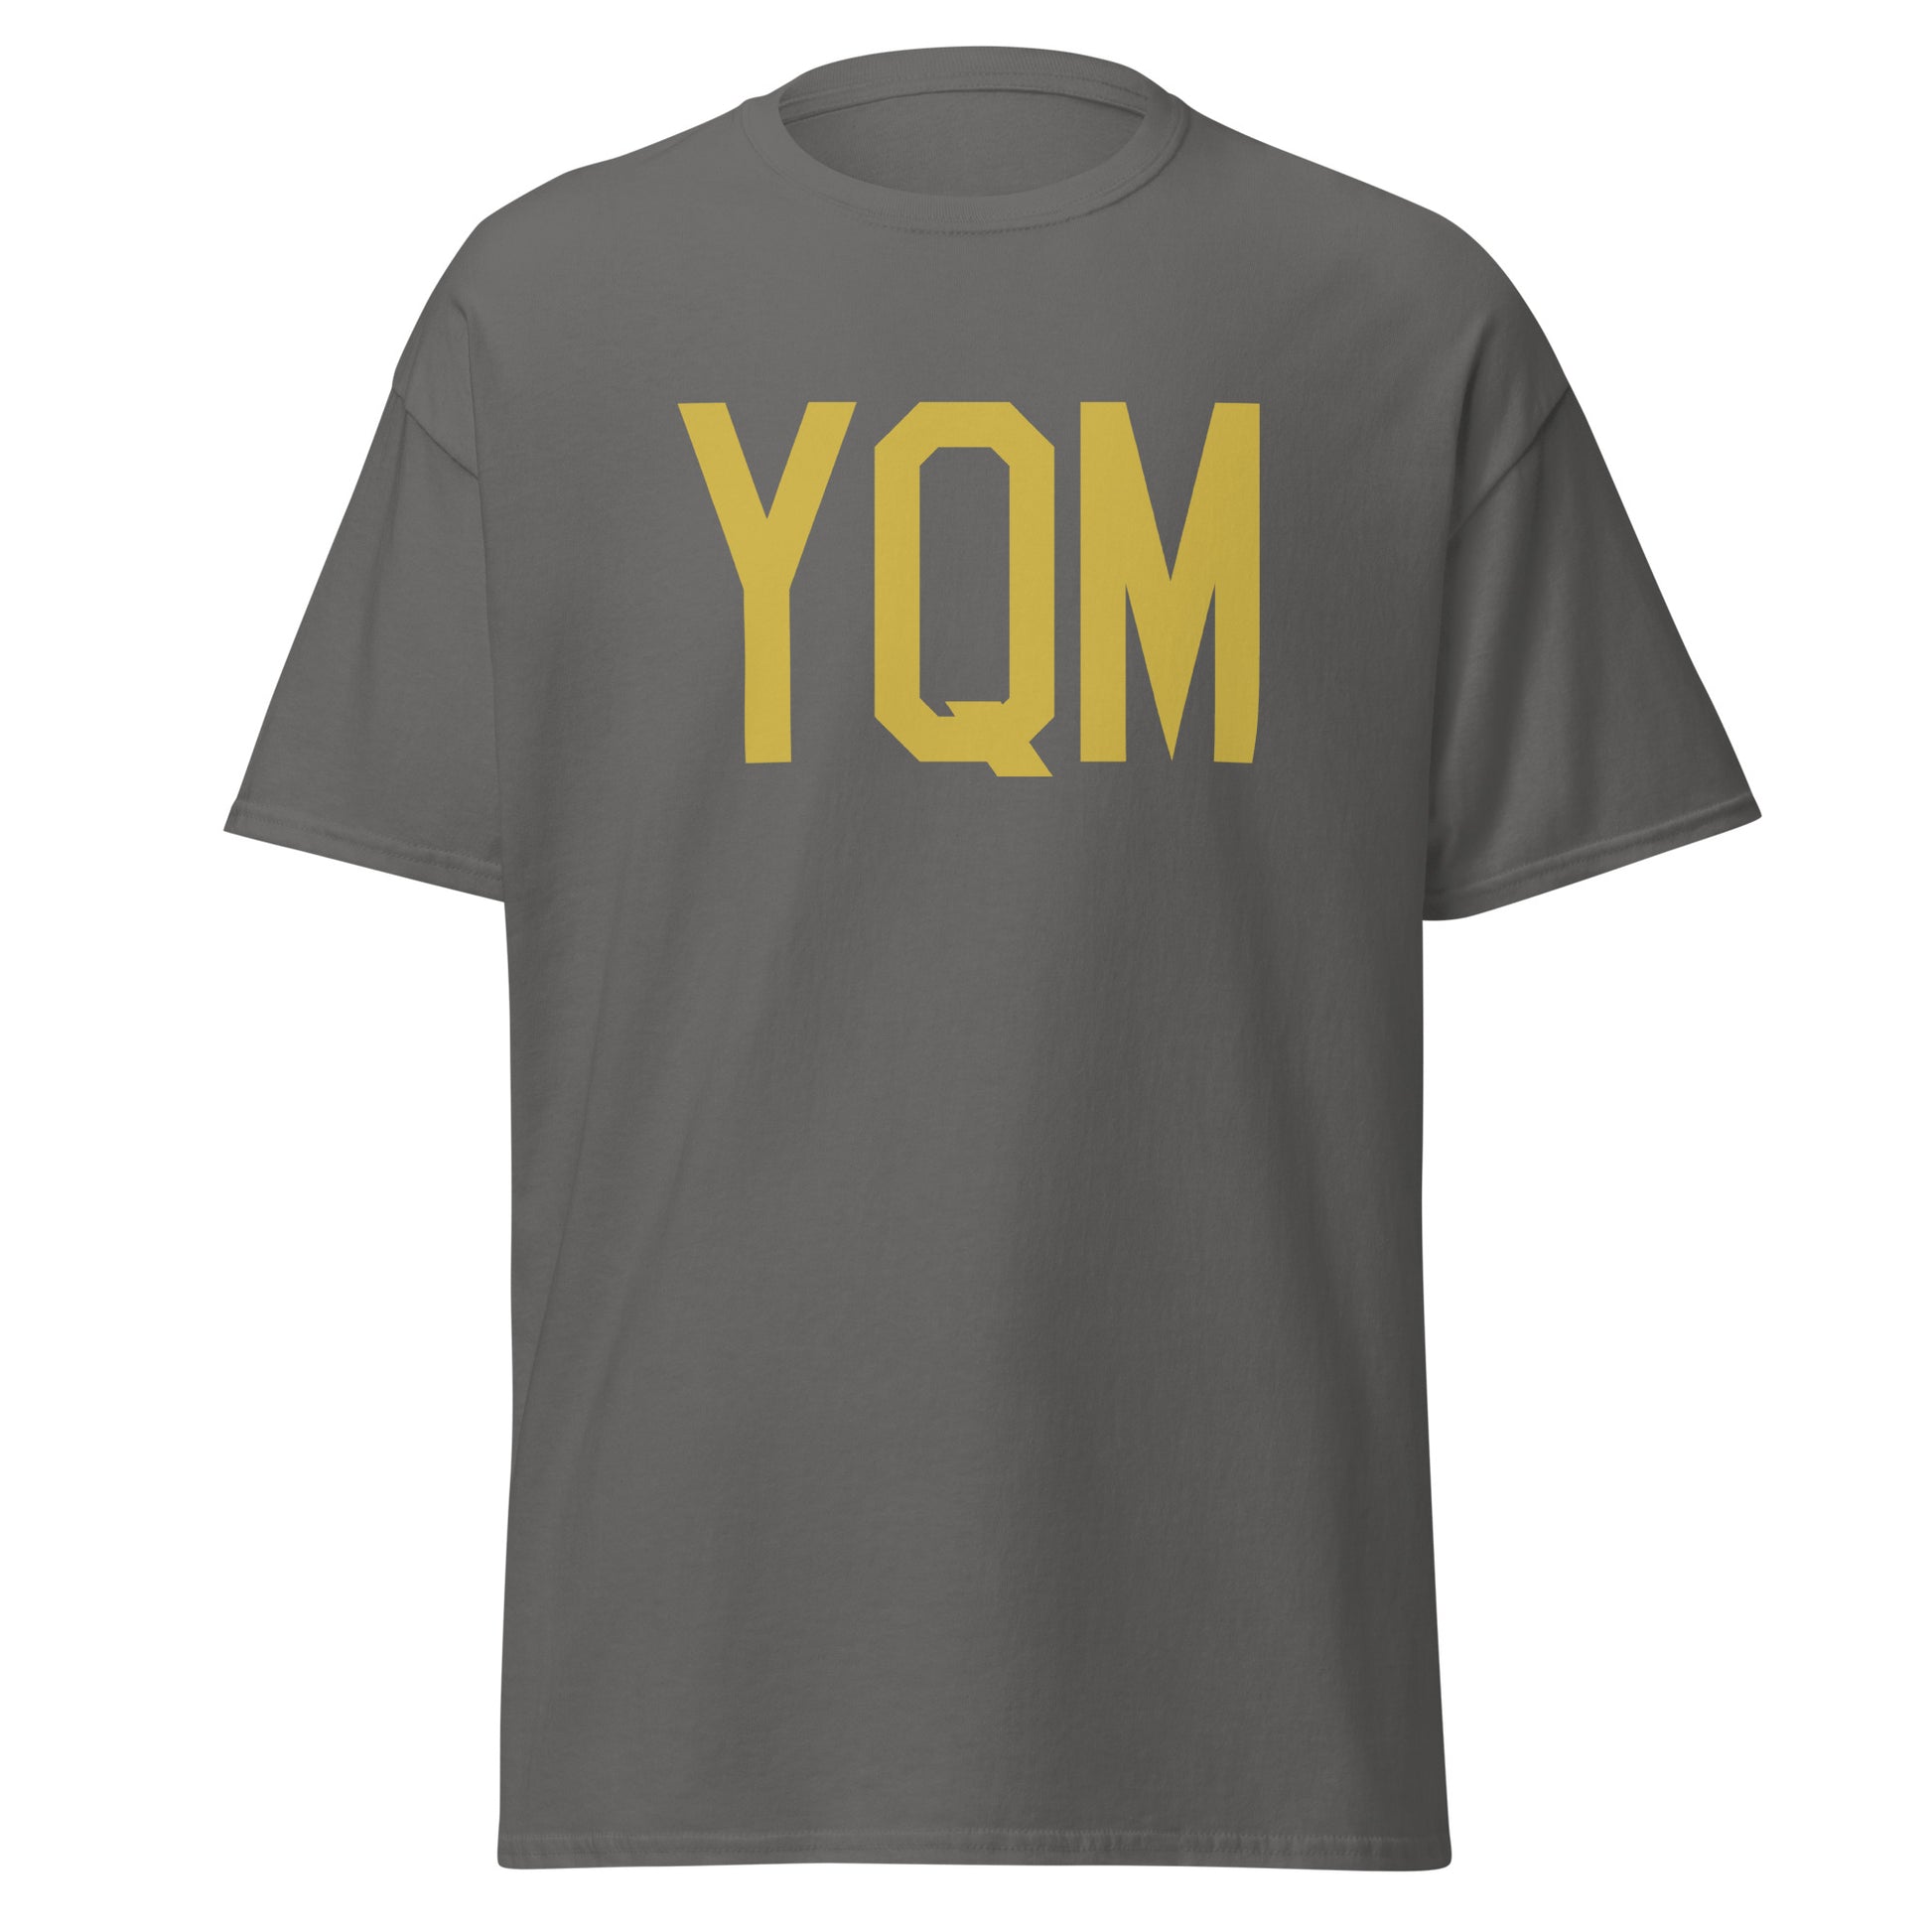 Aviation Enthusiast Men's Tee - Old Gold Graphic • YQM Moncton • YHM Designs - Image 05